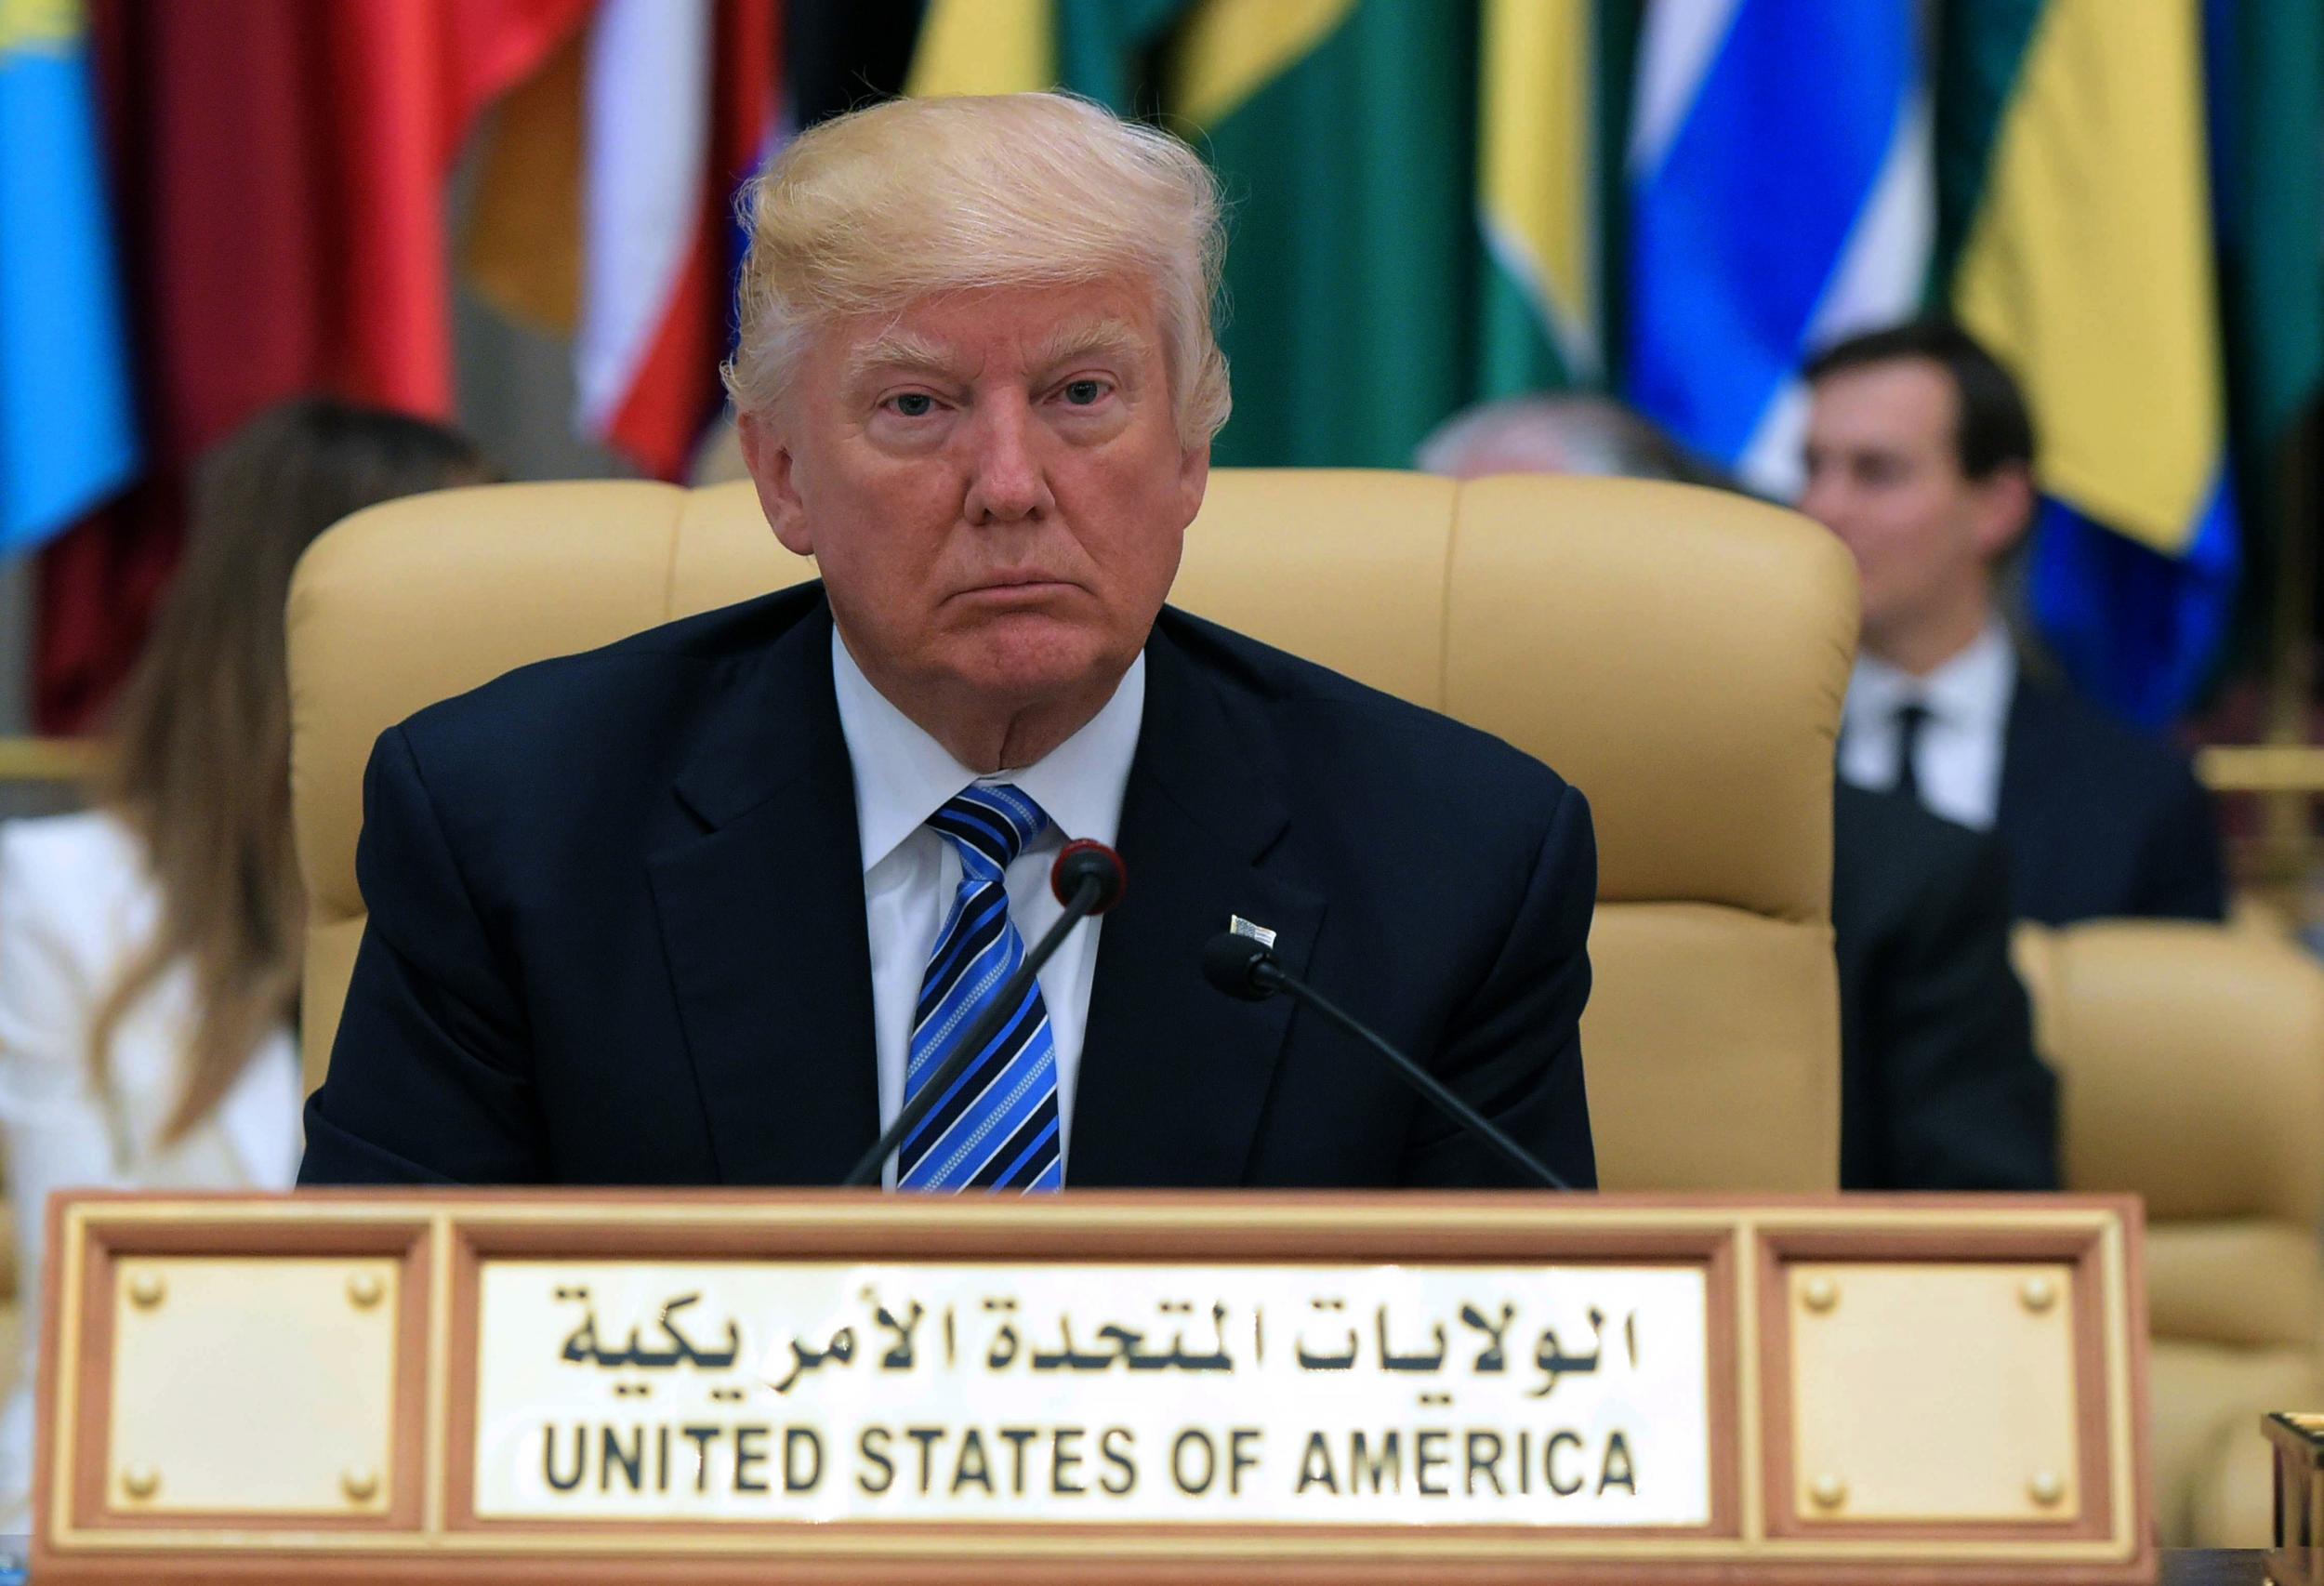 President Trump staying quiet on human rights abuses in Riyadh